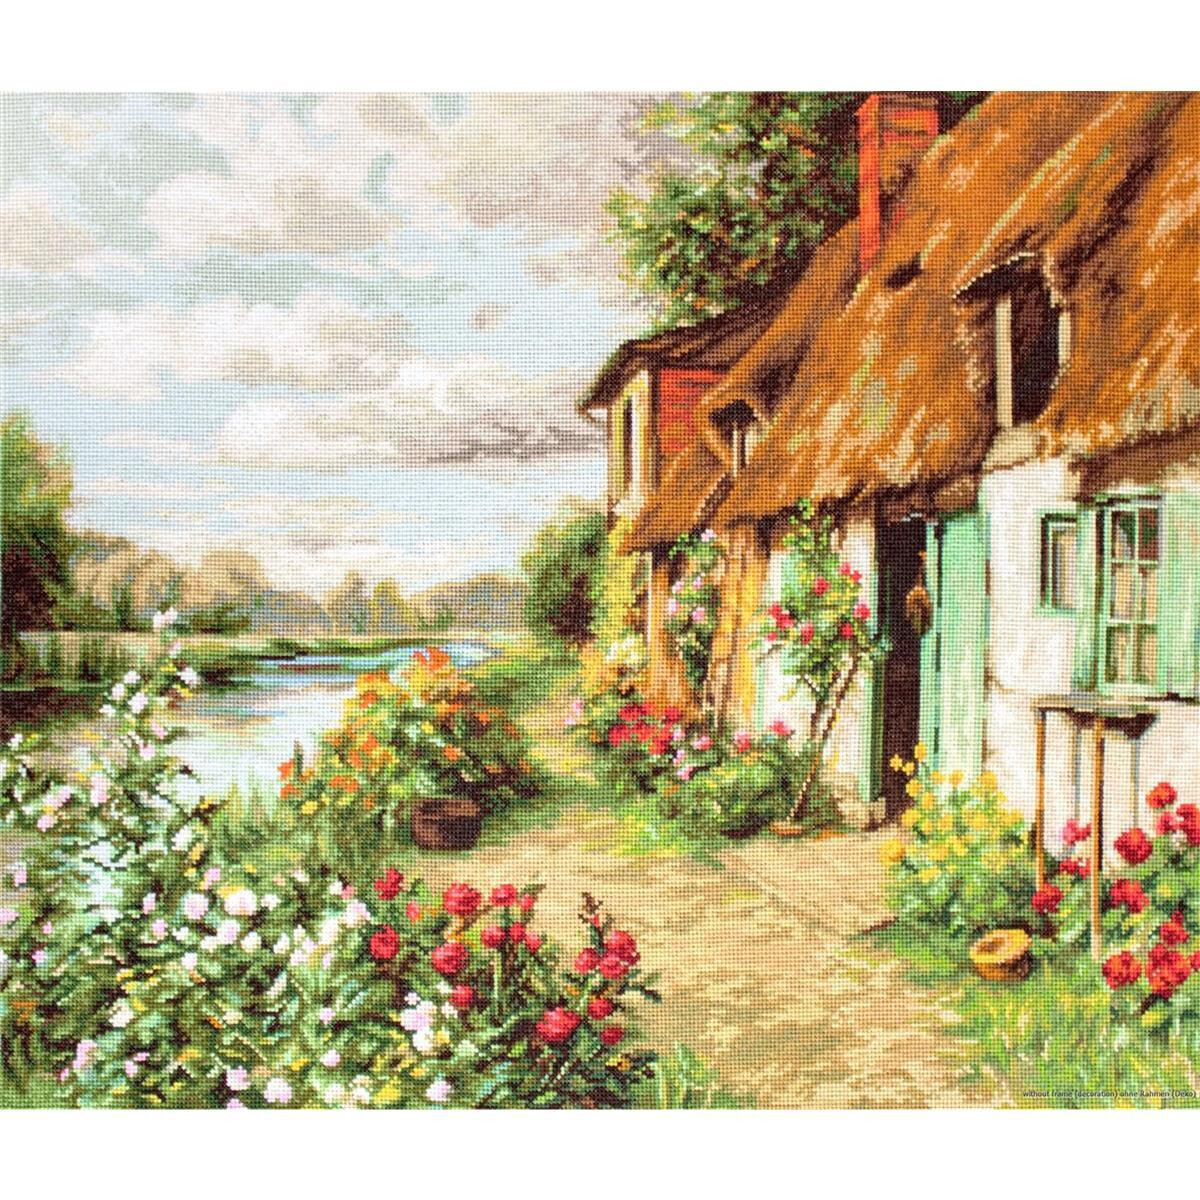 Luca-S counted Cross Stitch kit "Landscape",...